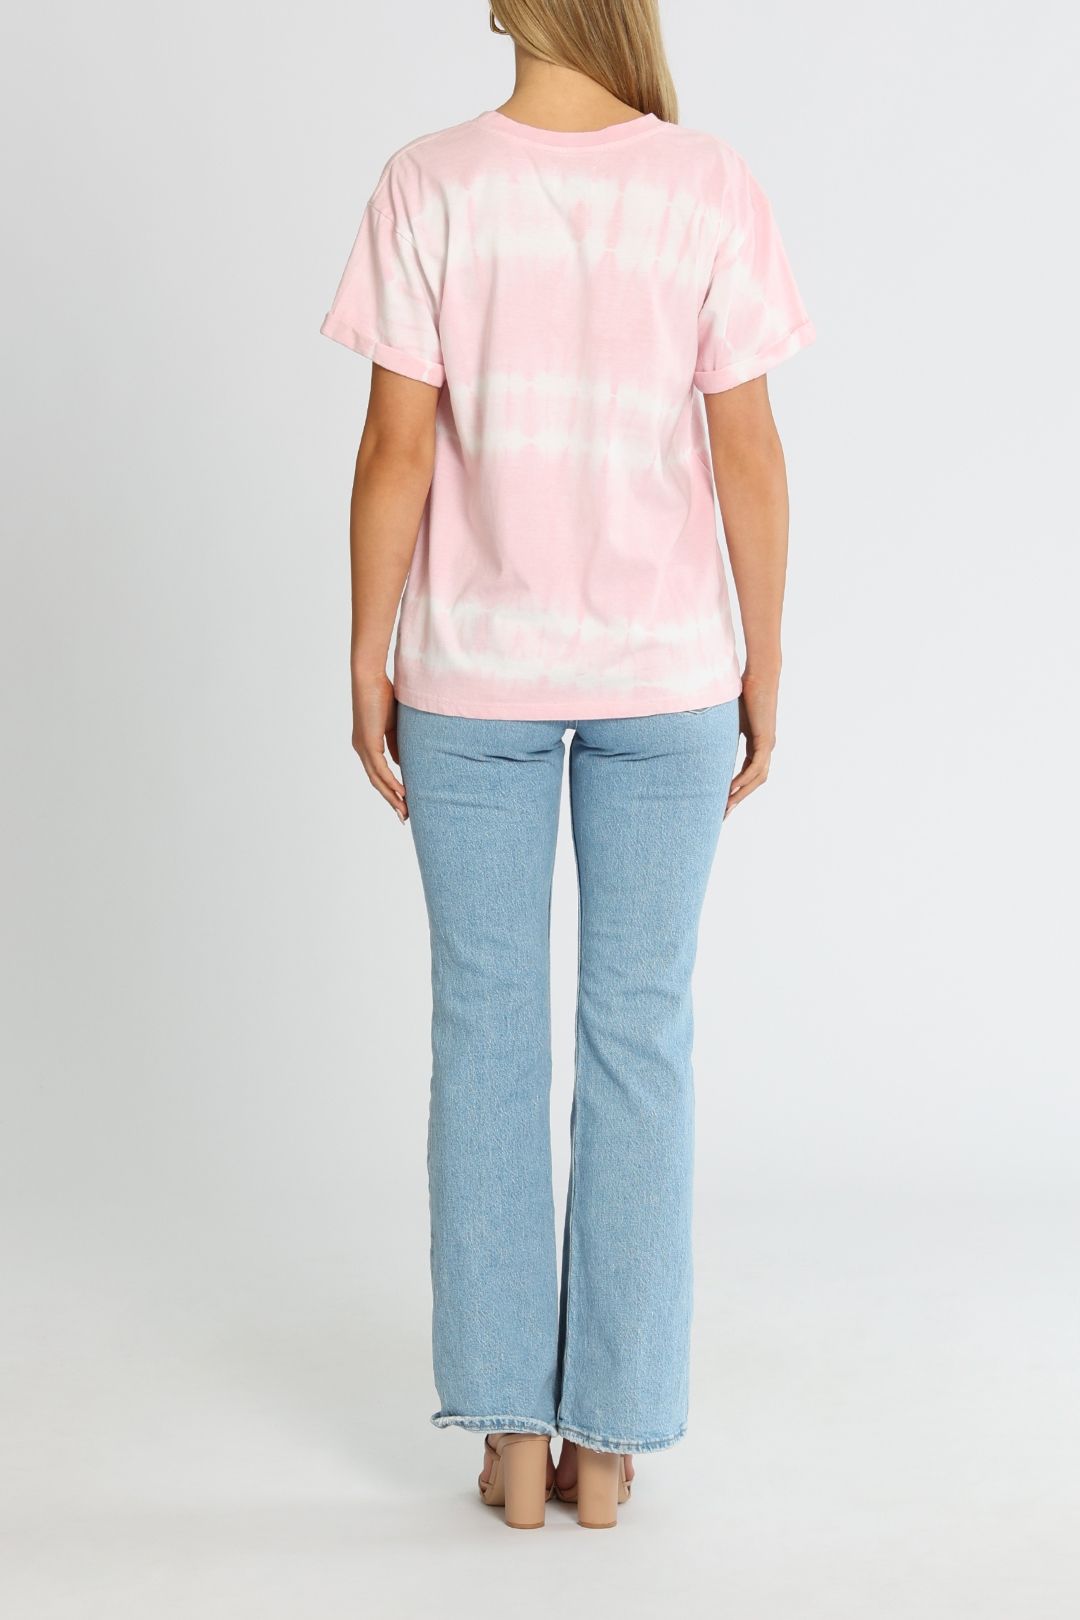 AJE Aster Tee Rose Pink White Relaxed Fit